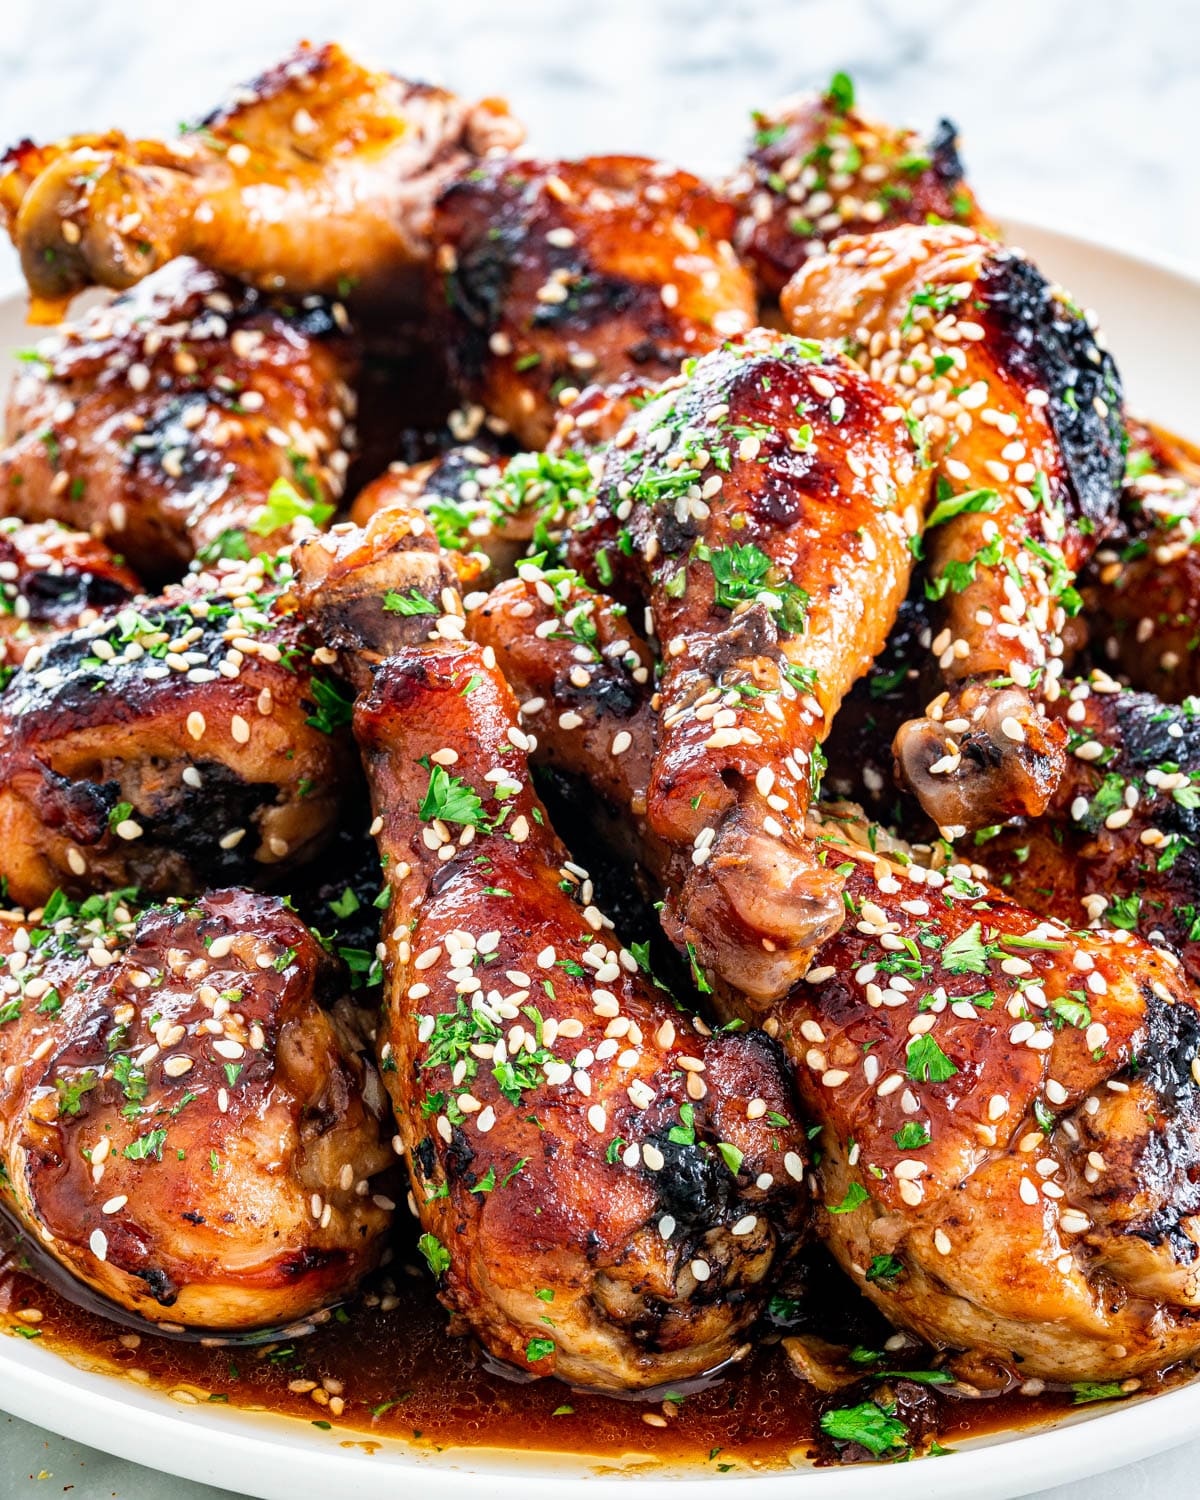 Korean BBQ Chicken on a white plate garnished with parsley